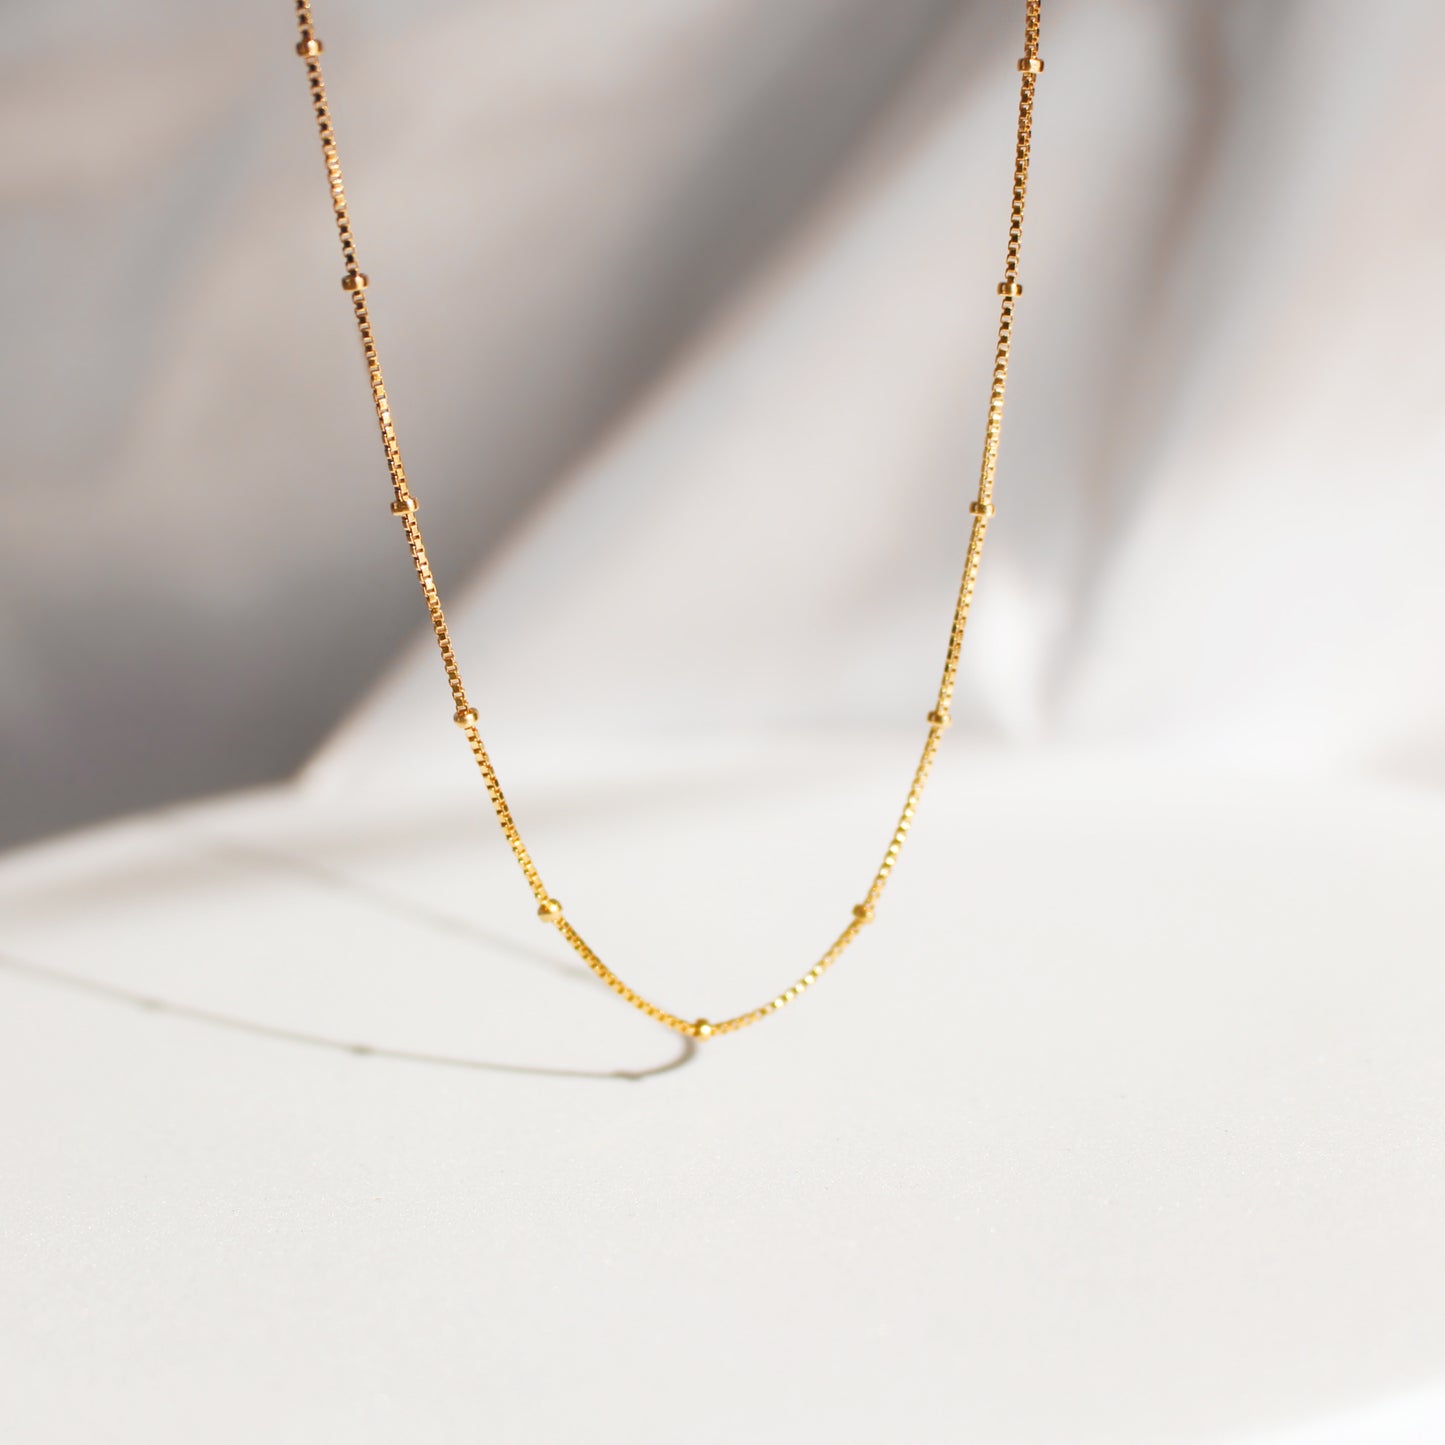 14k gold filled box with beads chain - Satellite necklace